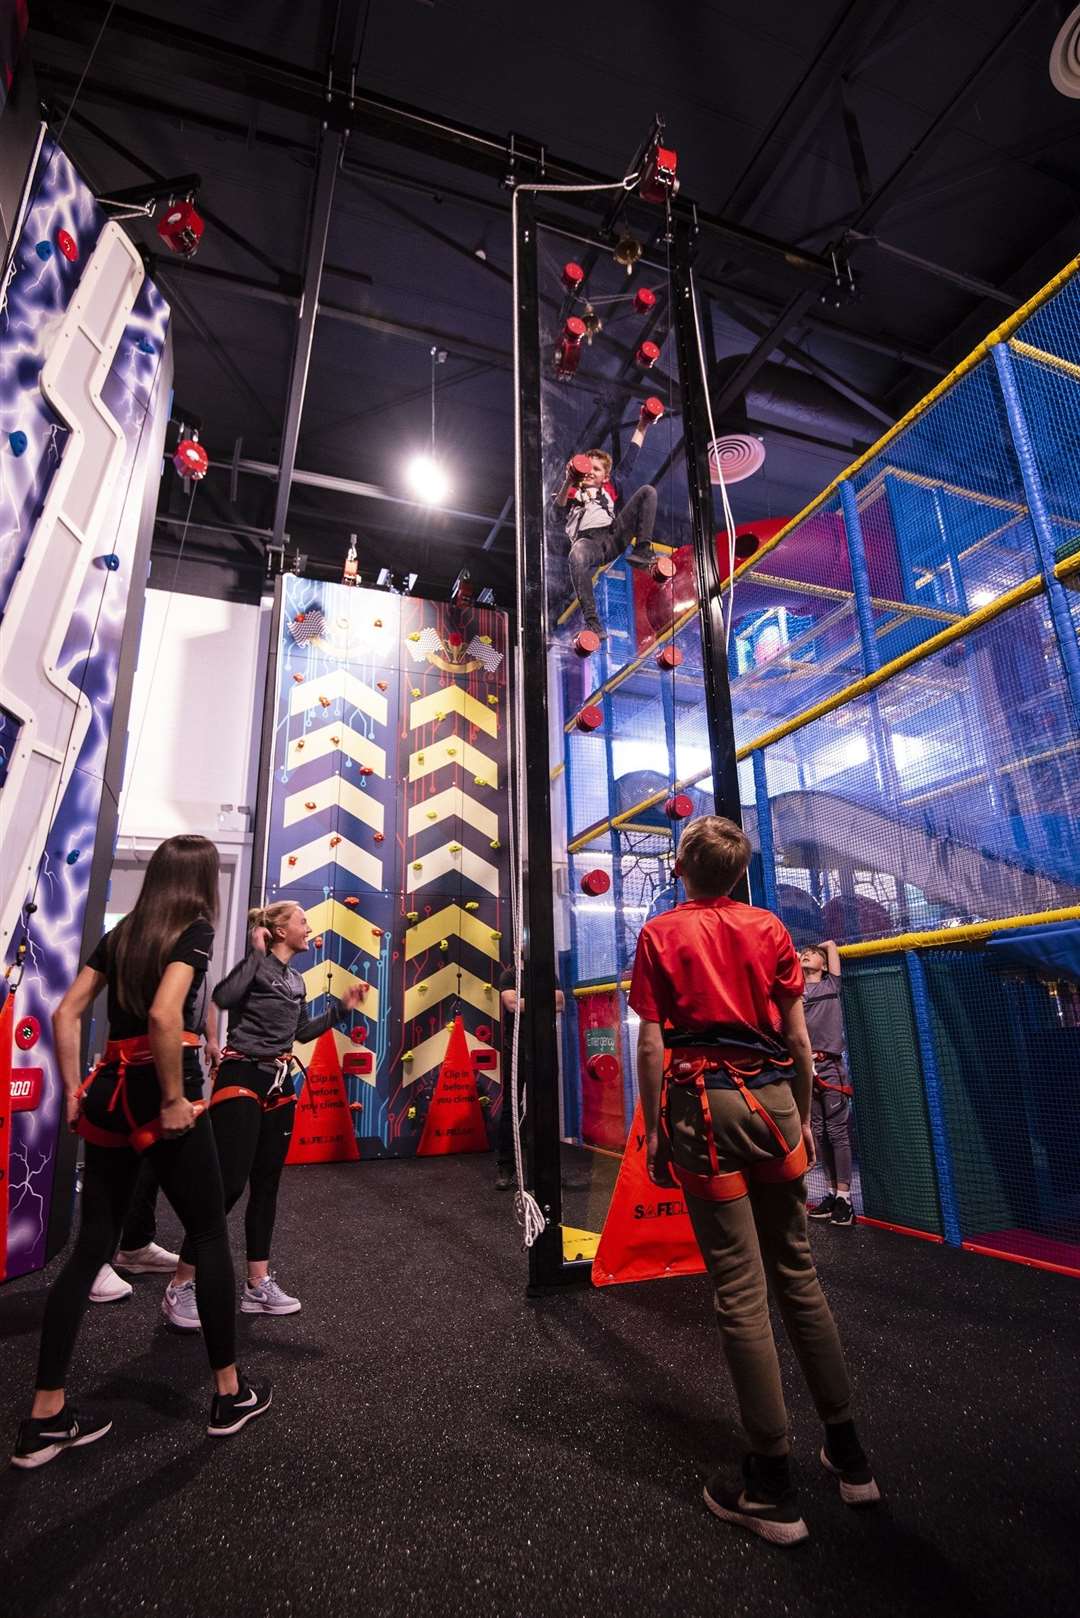 The dedicated climbing area is bound to encourage a wave of new users